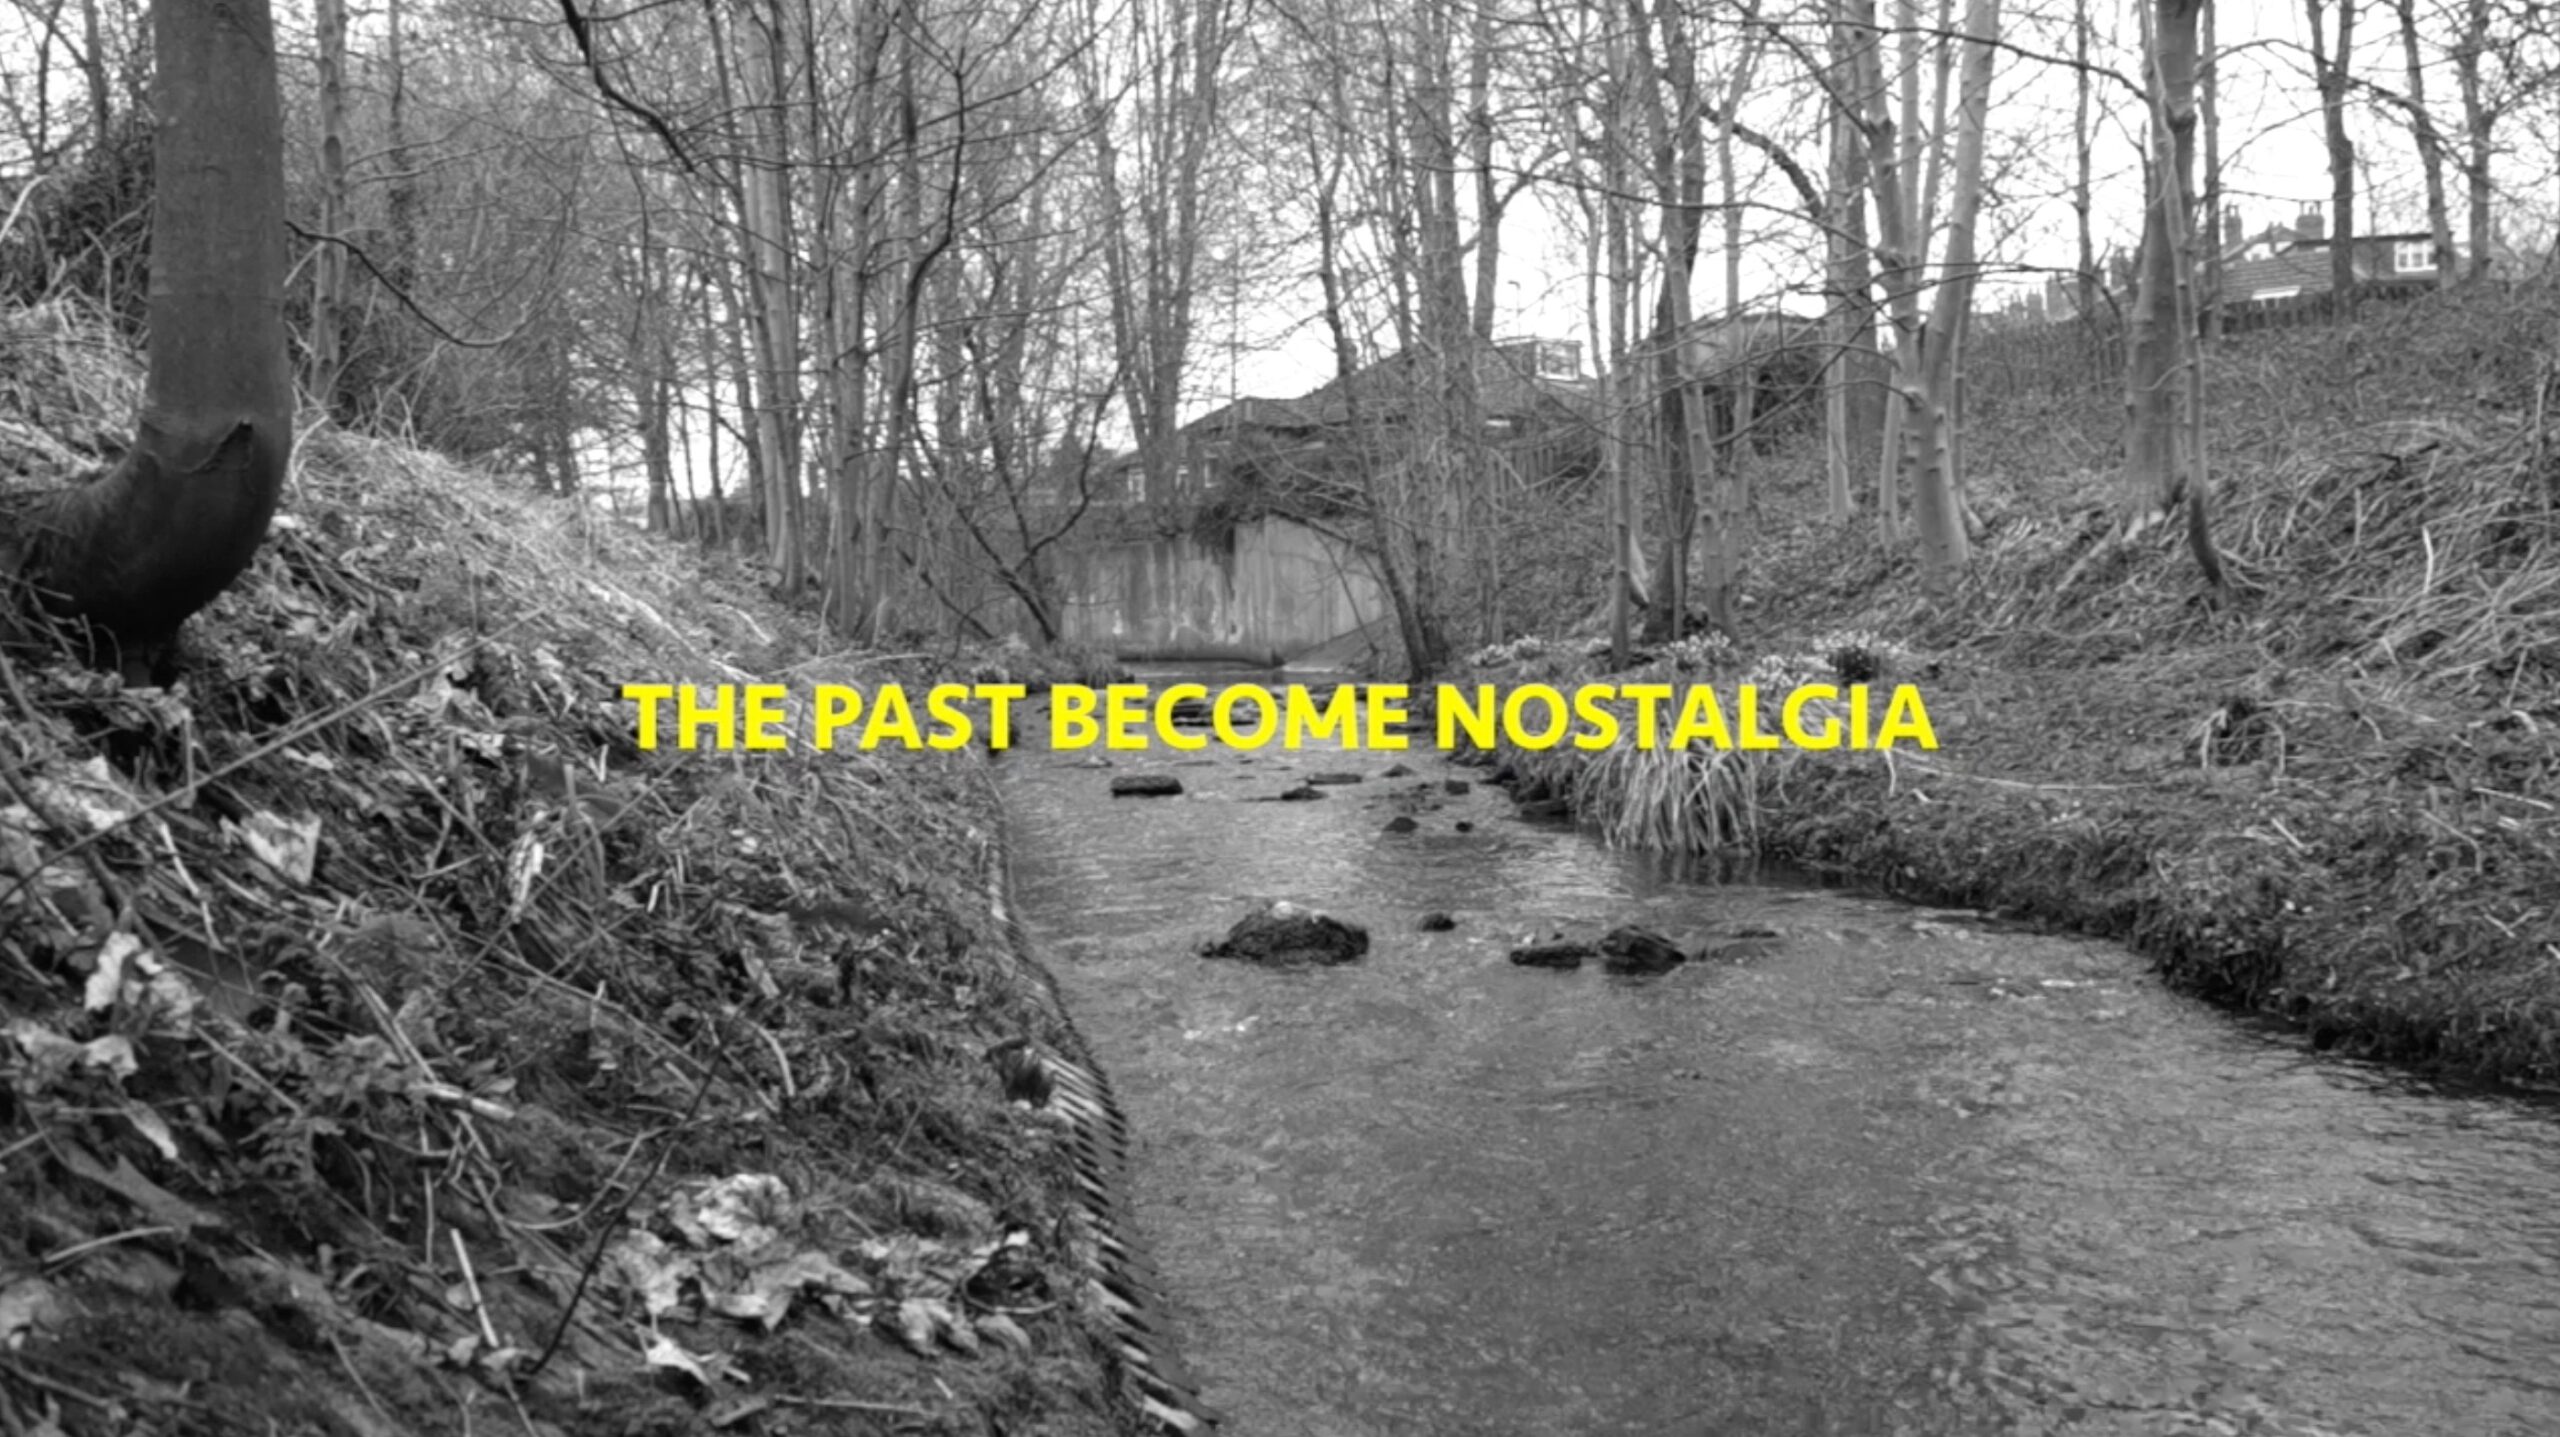 A black and white picture of a river in the wood, near habitation. In yellow Capitals there is a text on the top of the picture who said: THE PAST BECOME NOSTALGIA